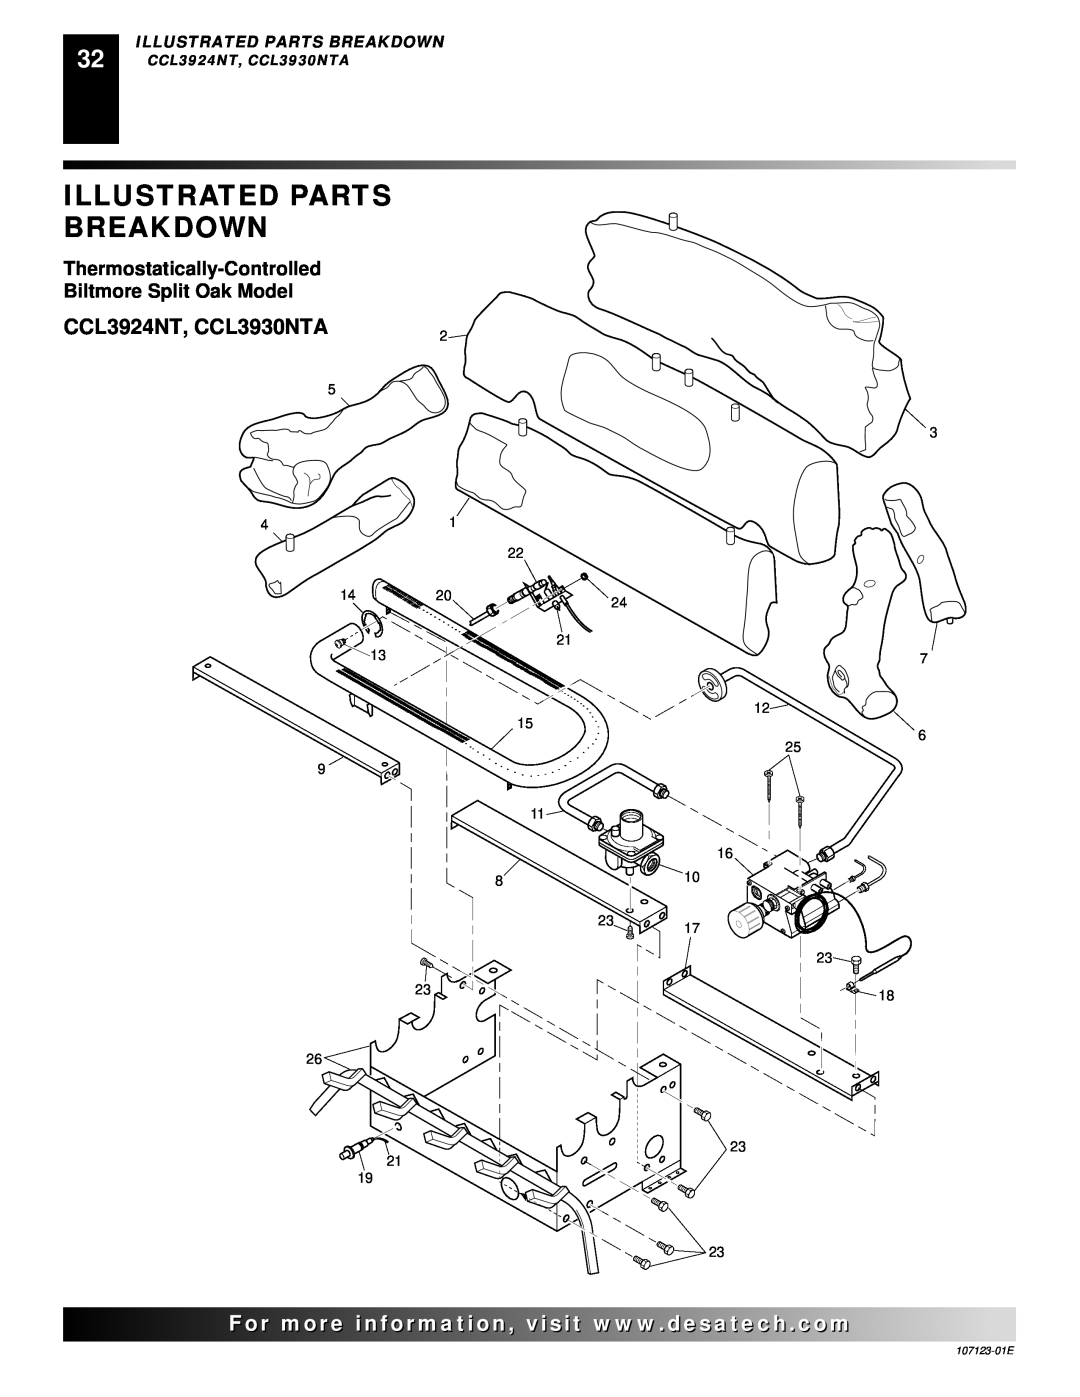 Desa CGD3924NT Illustrated Parts Breakdown, Thermostatically-Controlled, Biltmore Split Oak Model, CCL3924NT, CCL3930NTA 